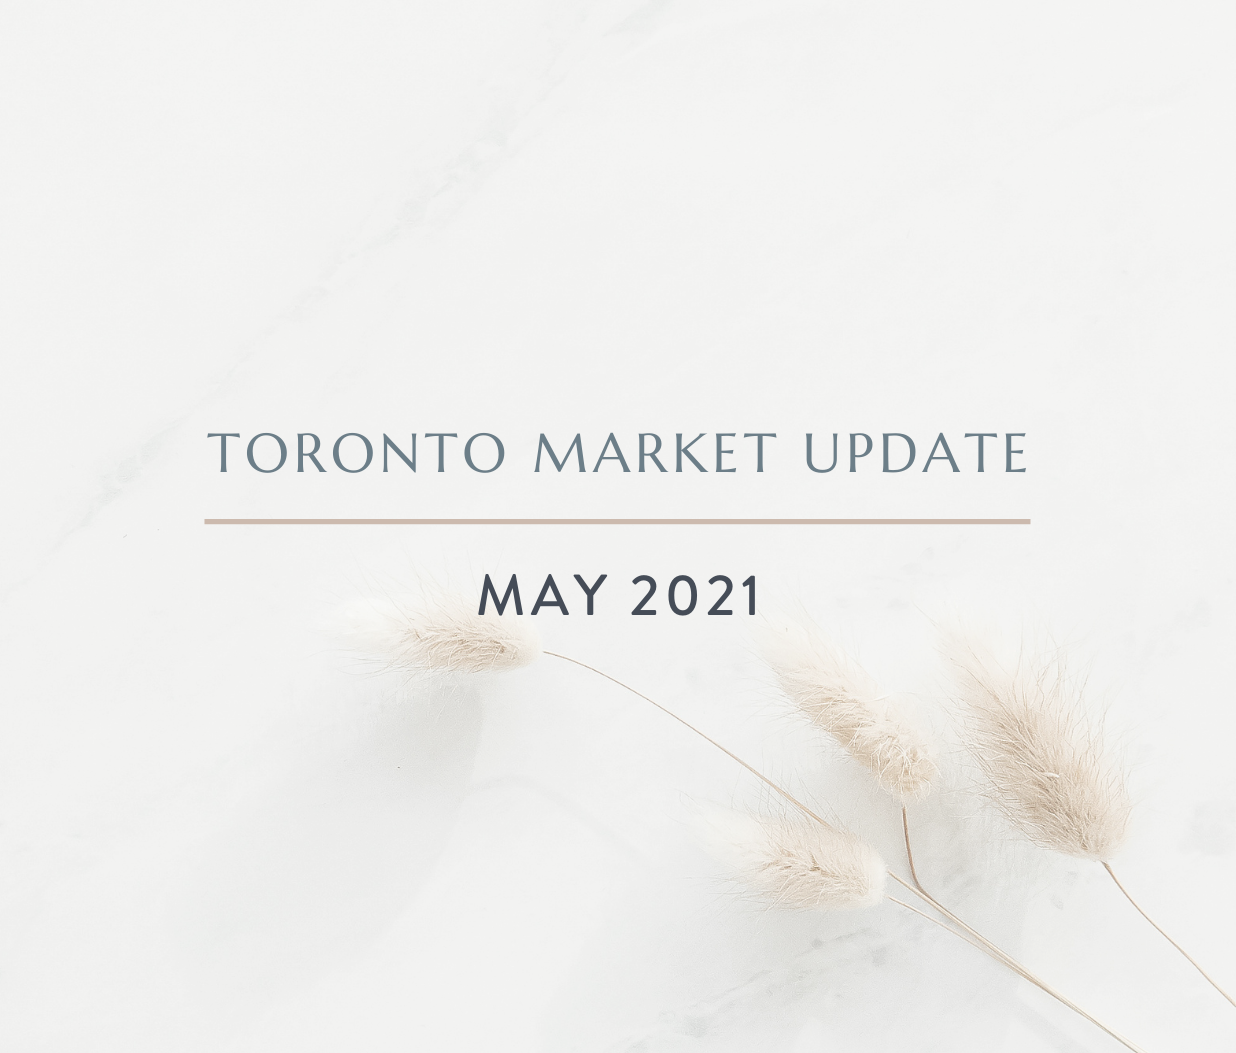 Toronto Market Update for May 2021